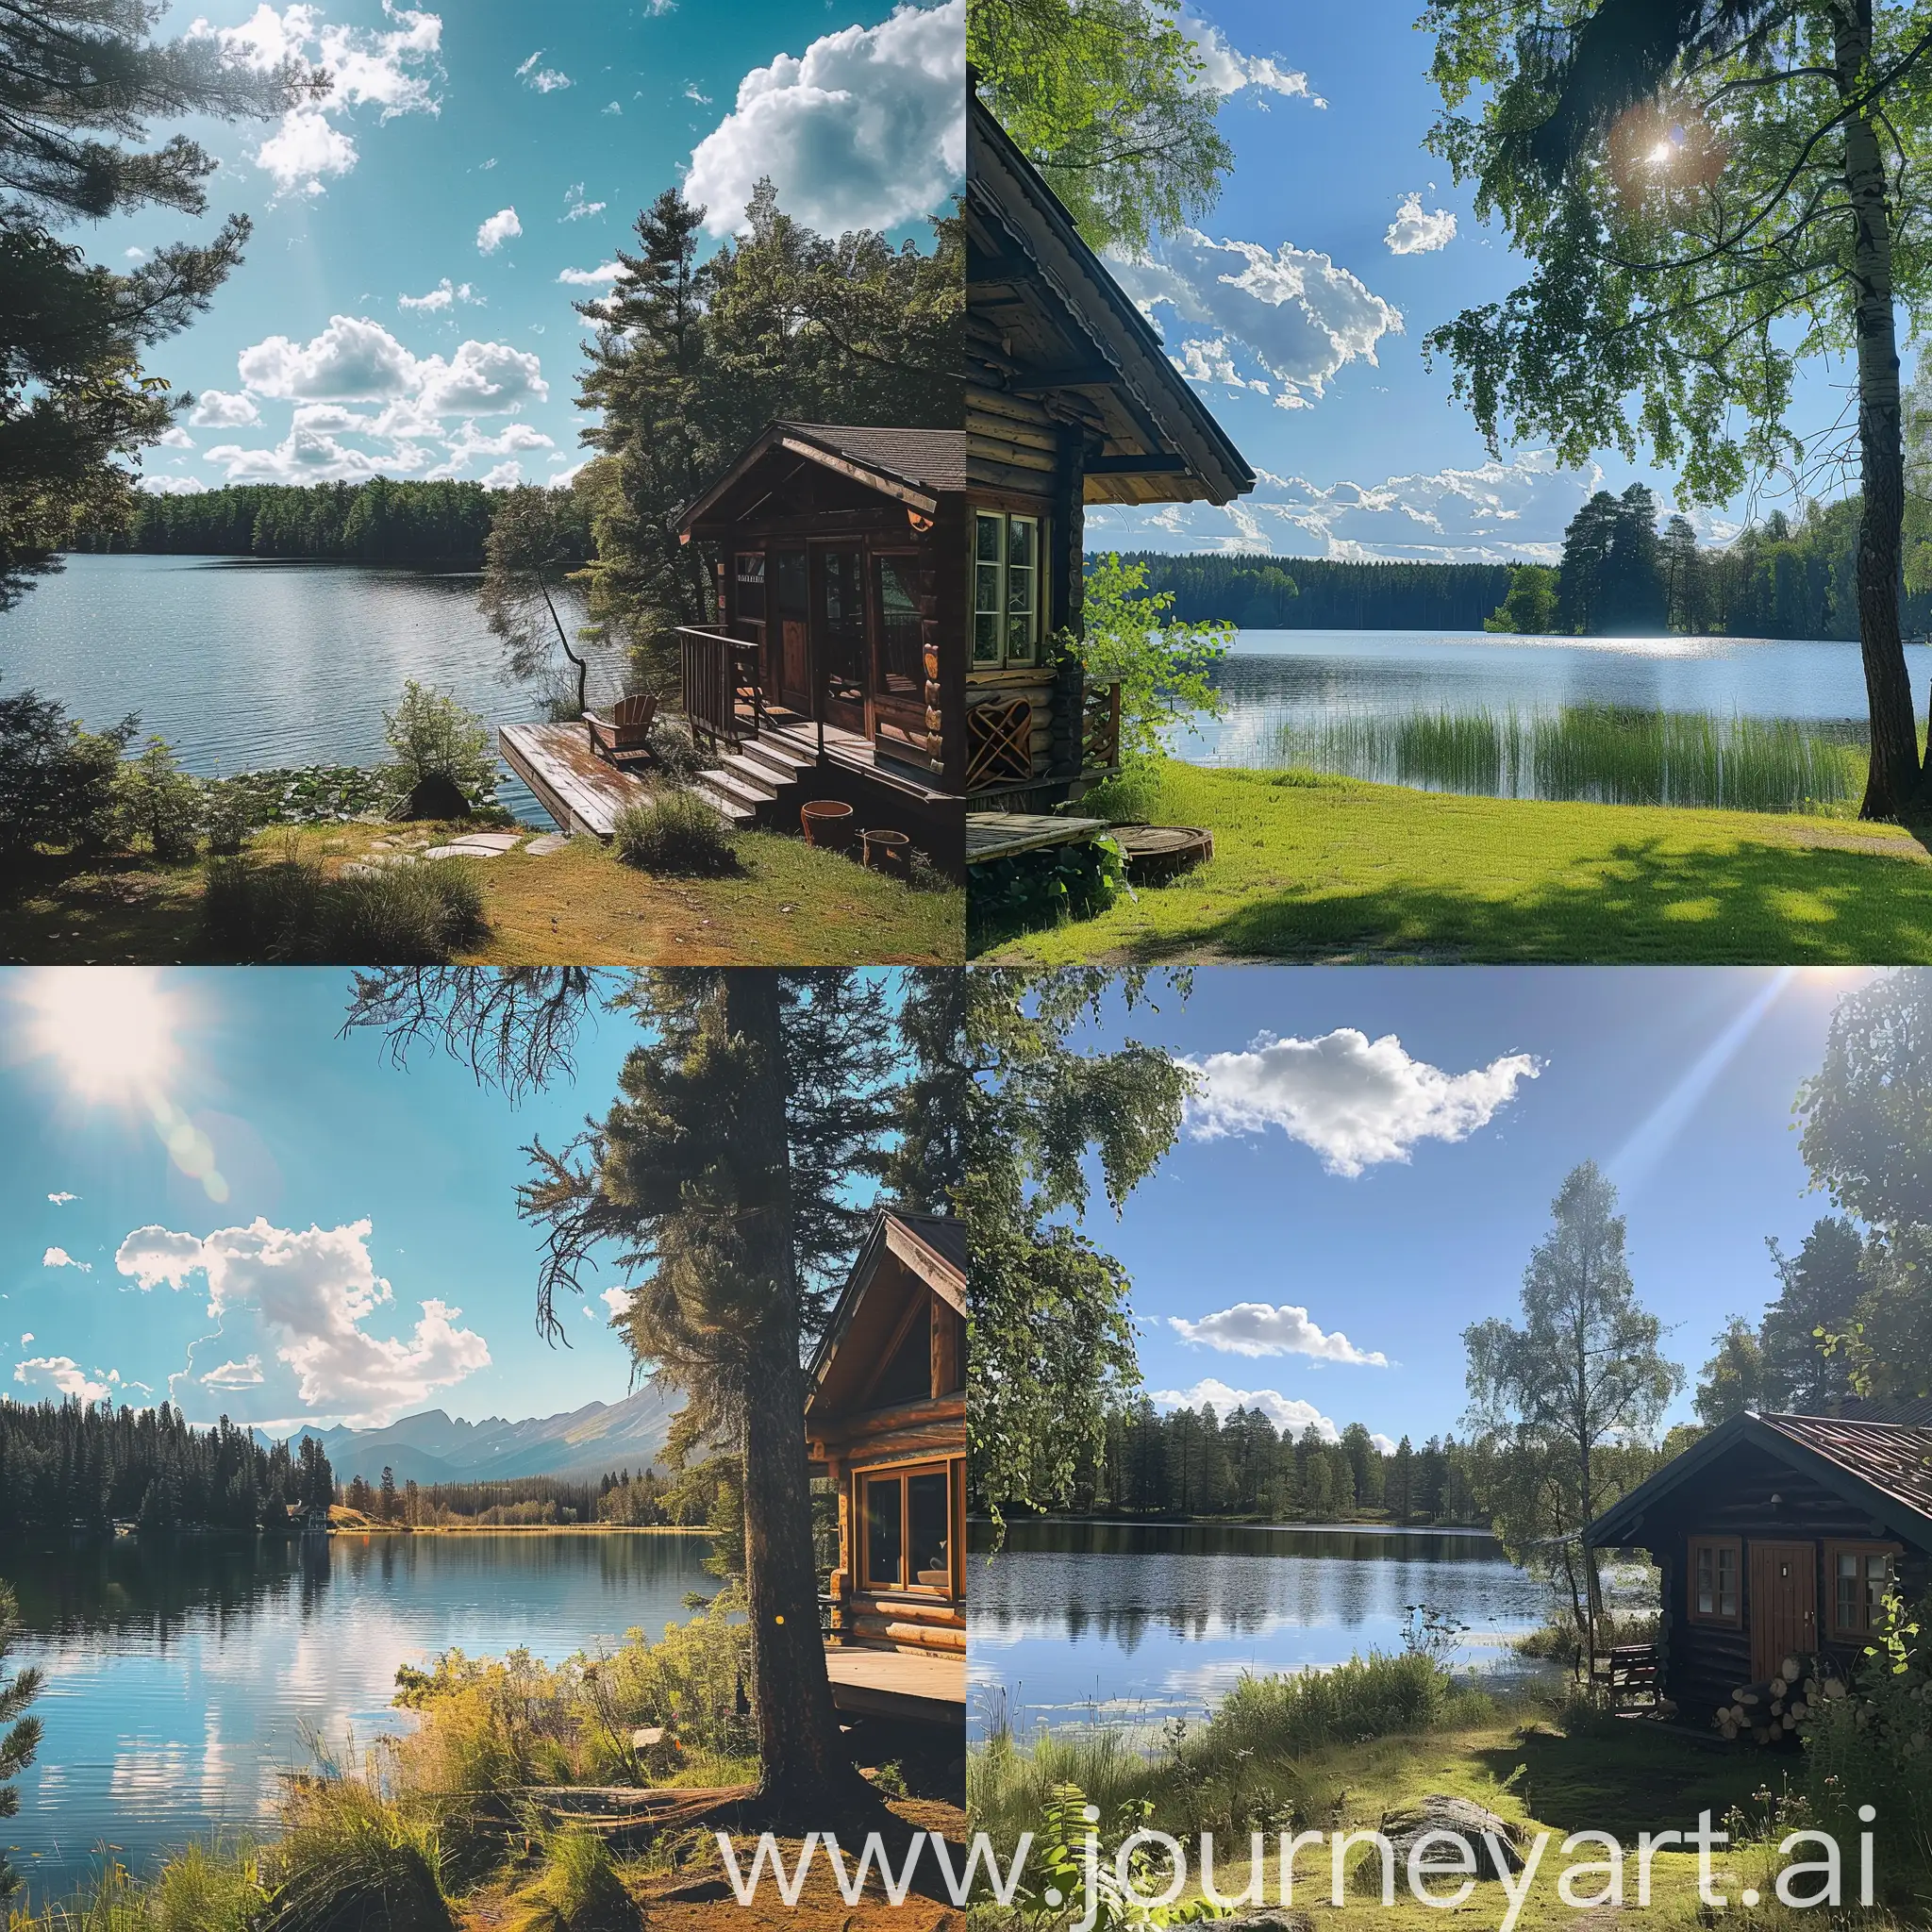 Sunny-Lakeside-Cabin-Retreat-Tranquil-Waterside-Scene-on-a-Bright-Day